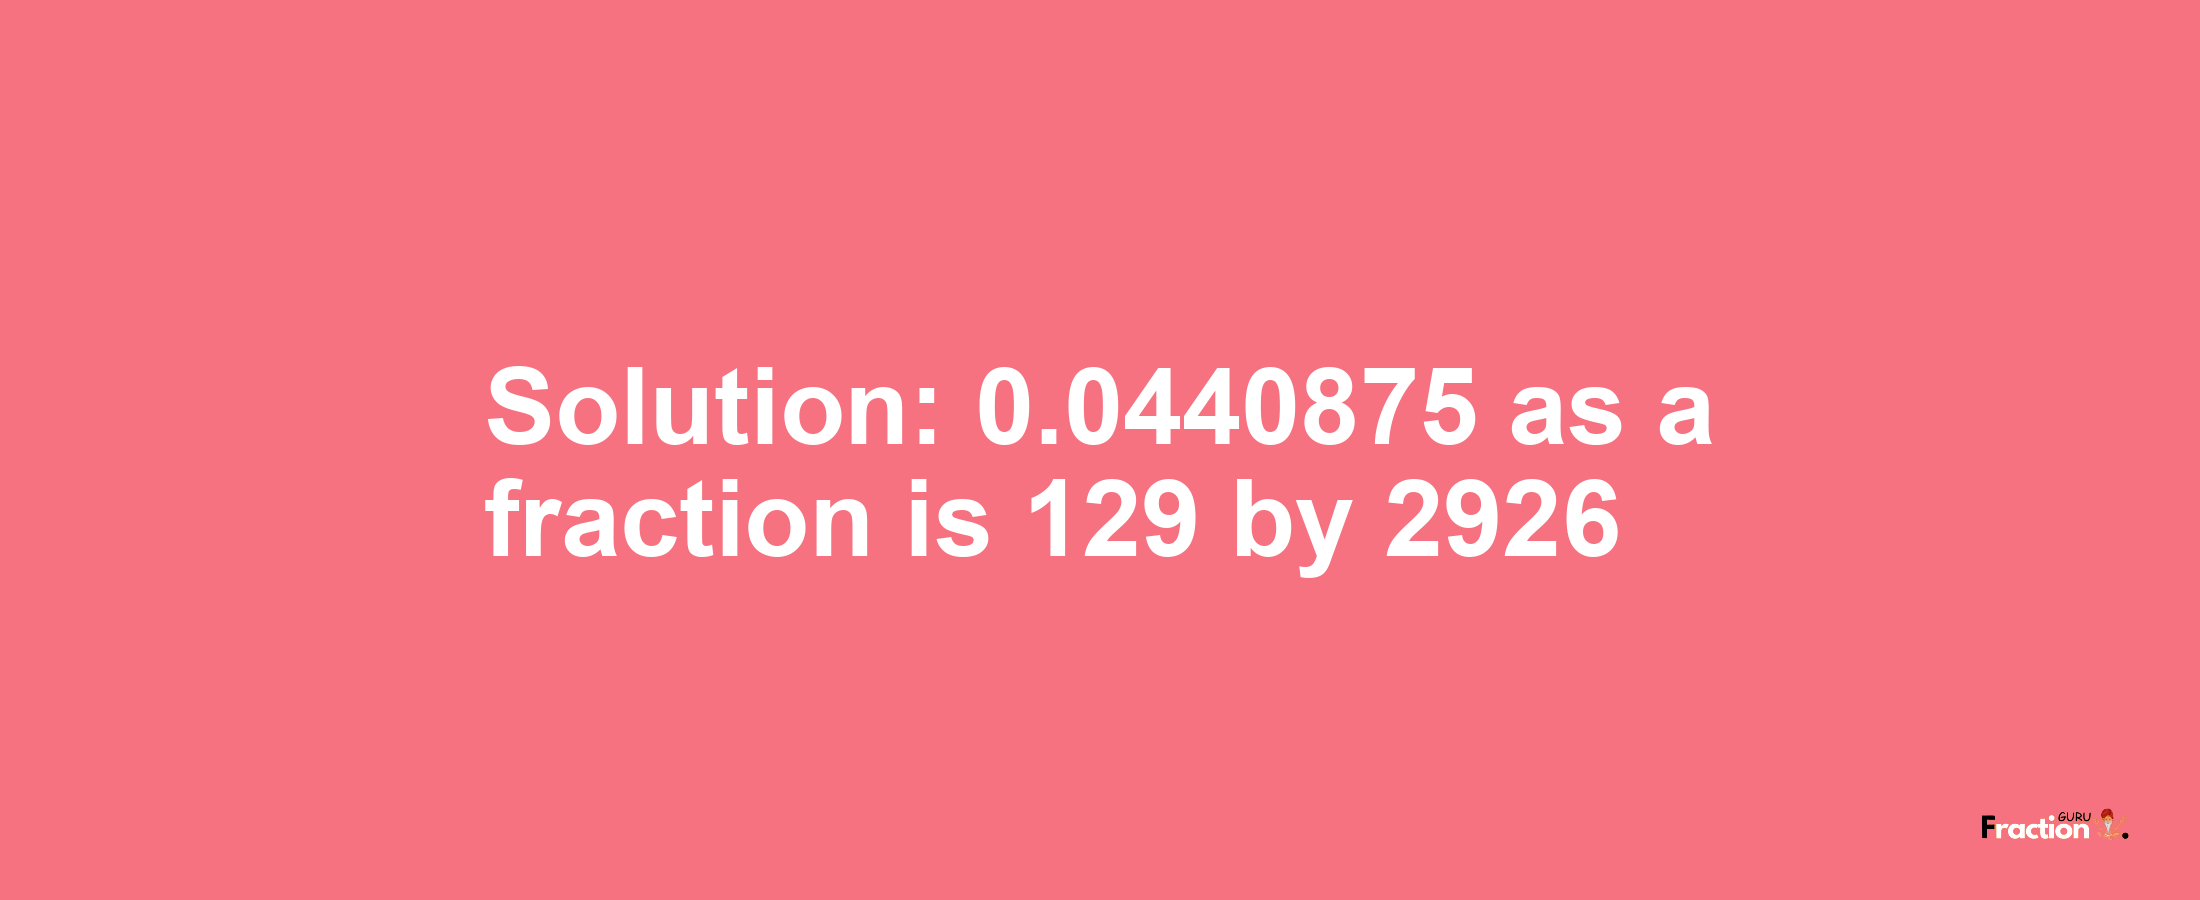 Solution:0.0440875 as a fraction is 129/2926